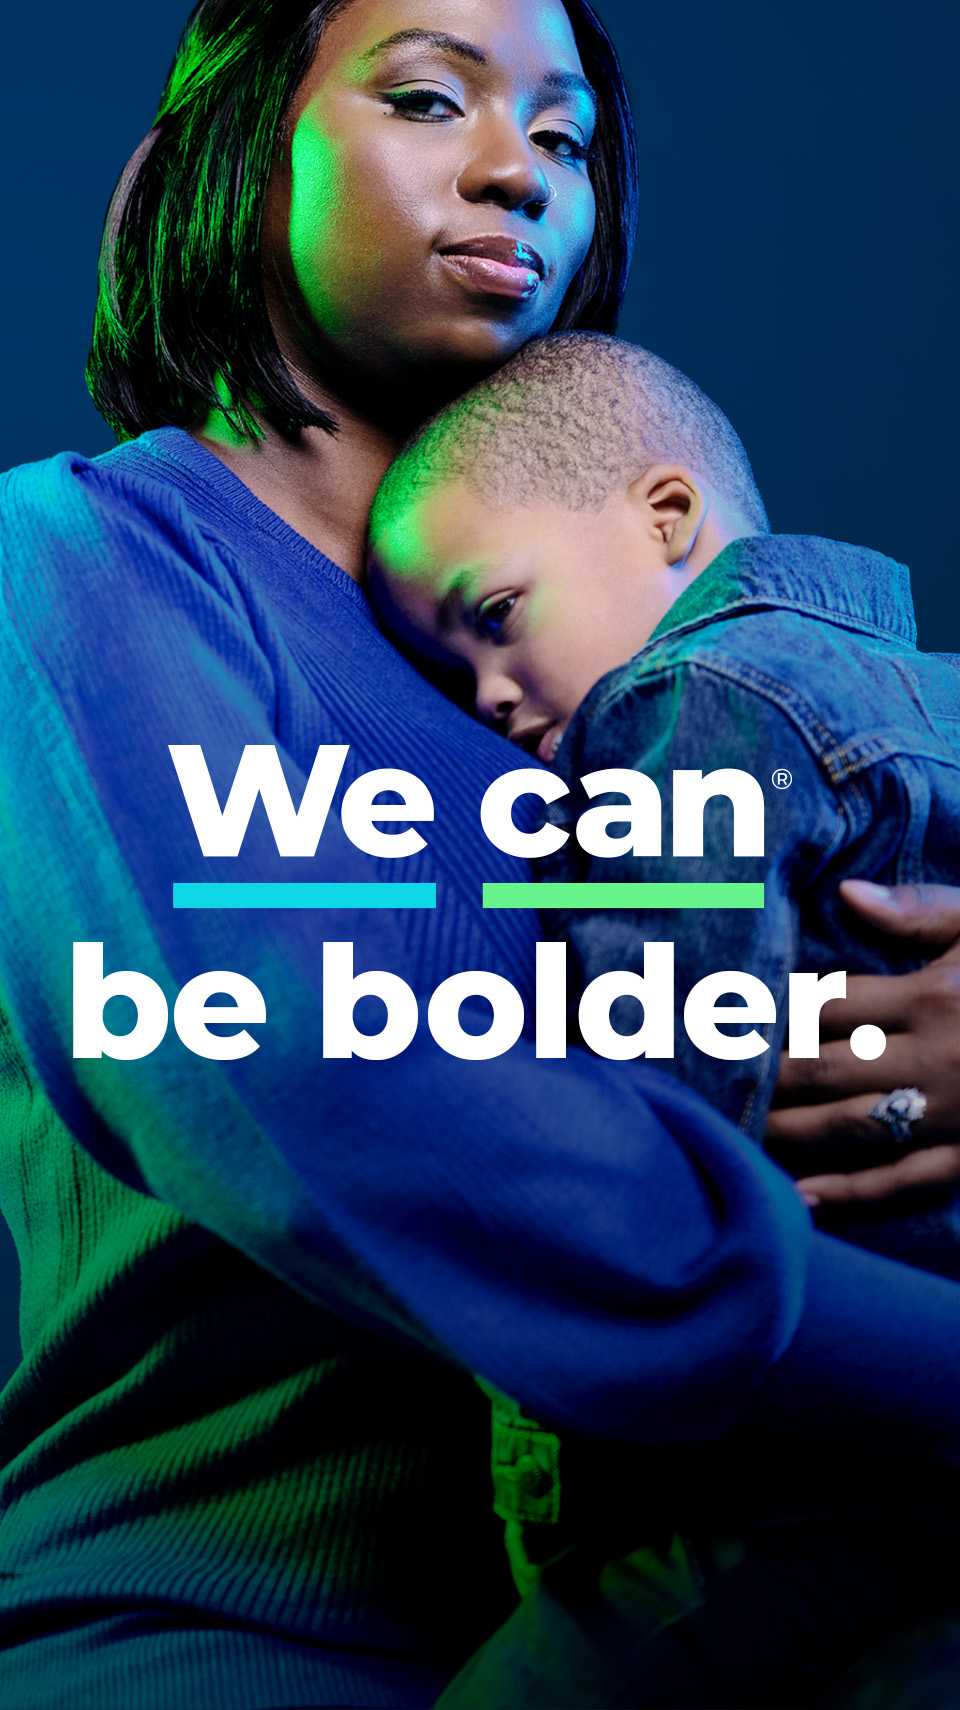 We can be bolder